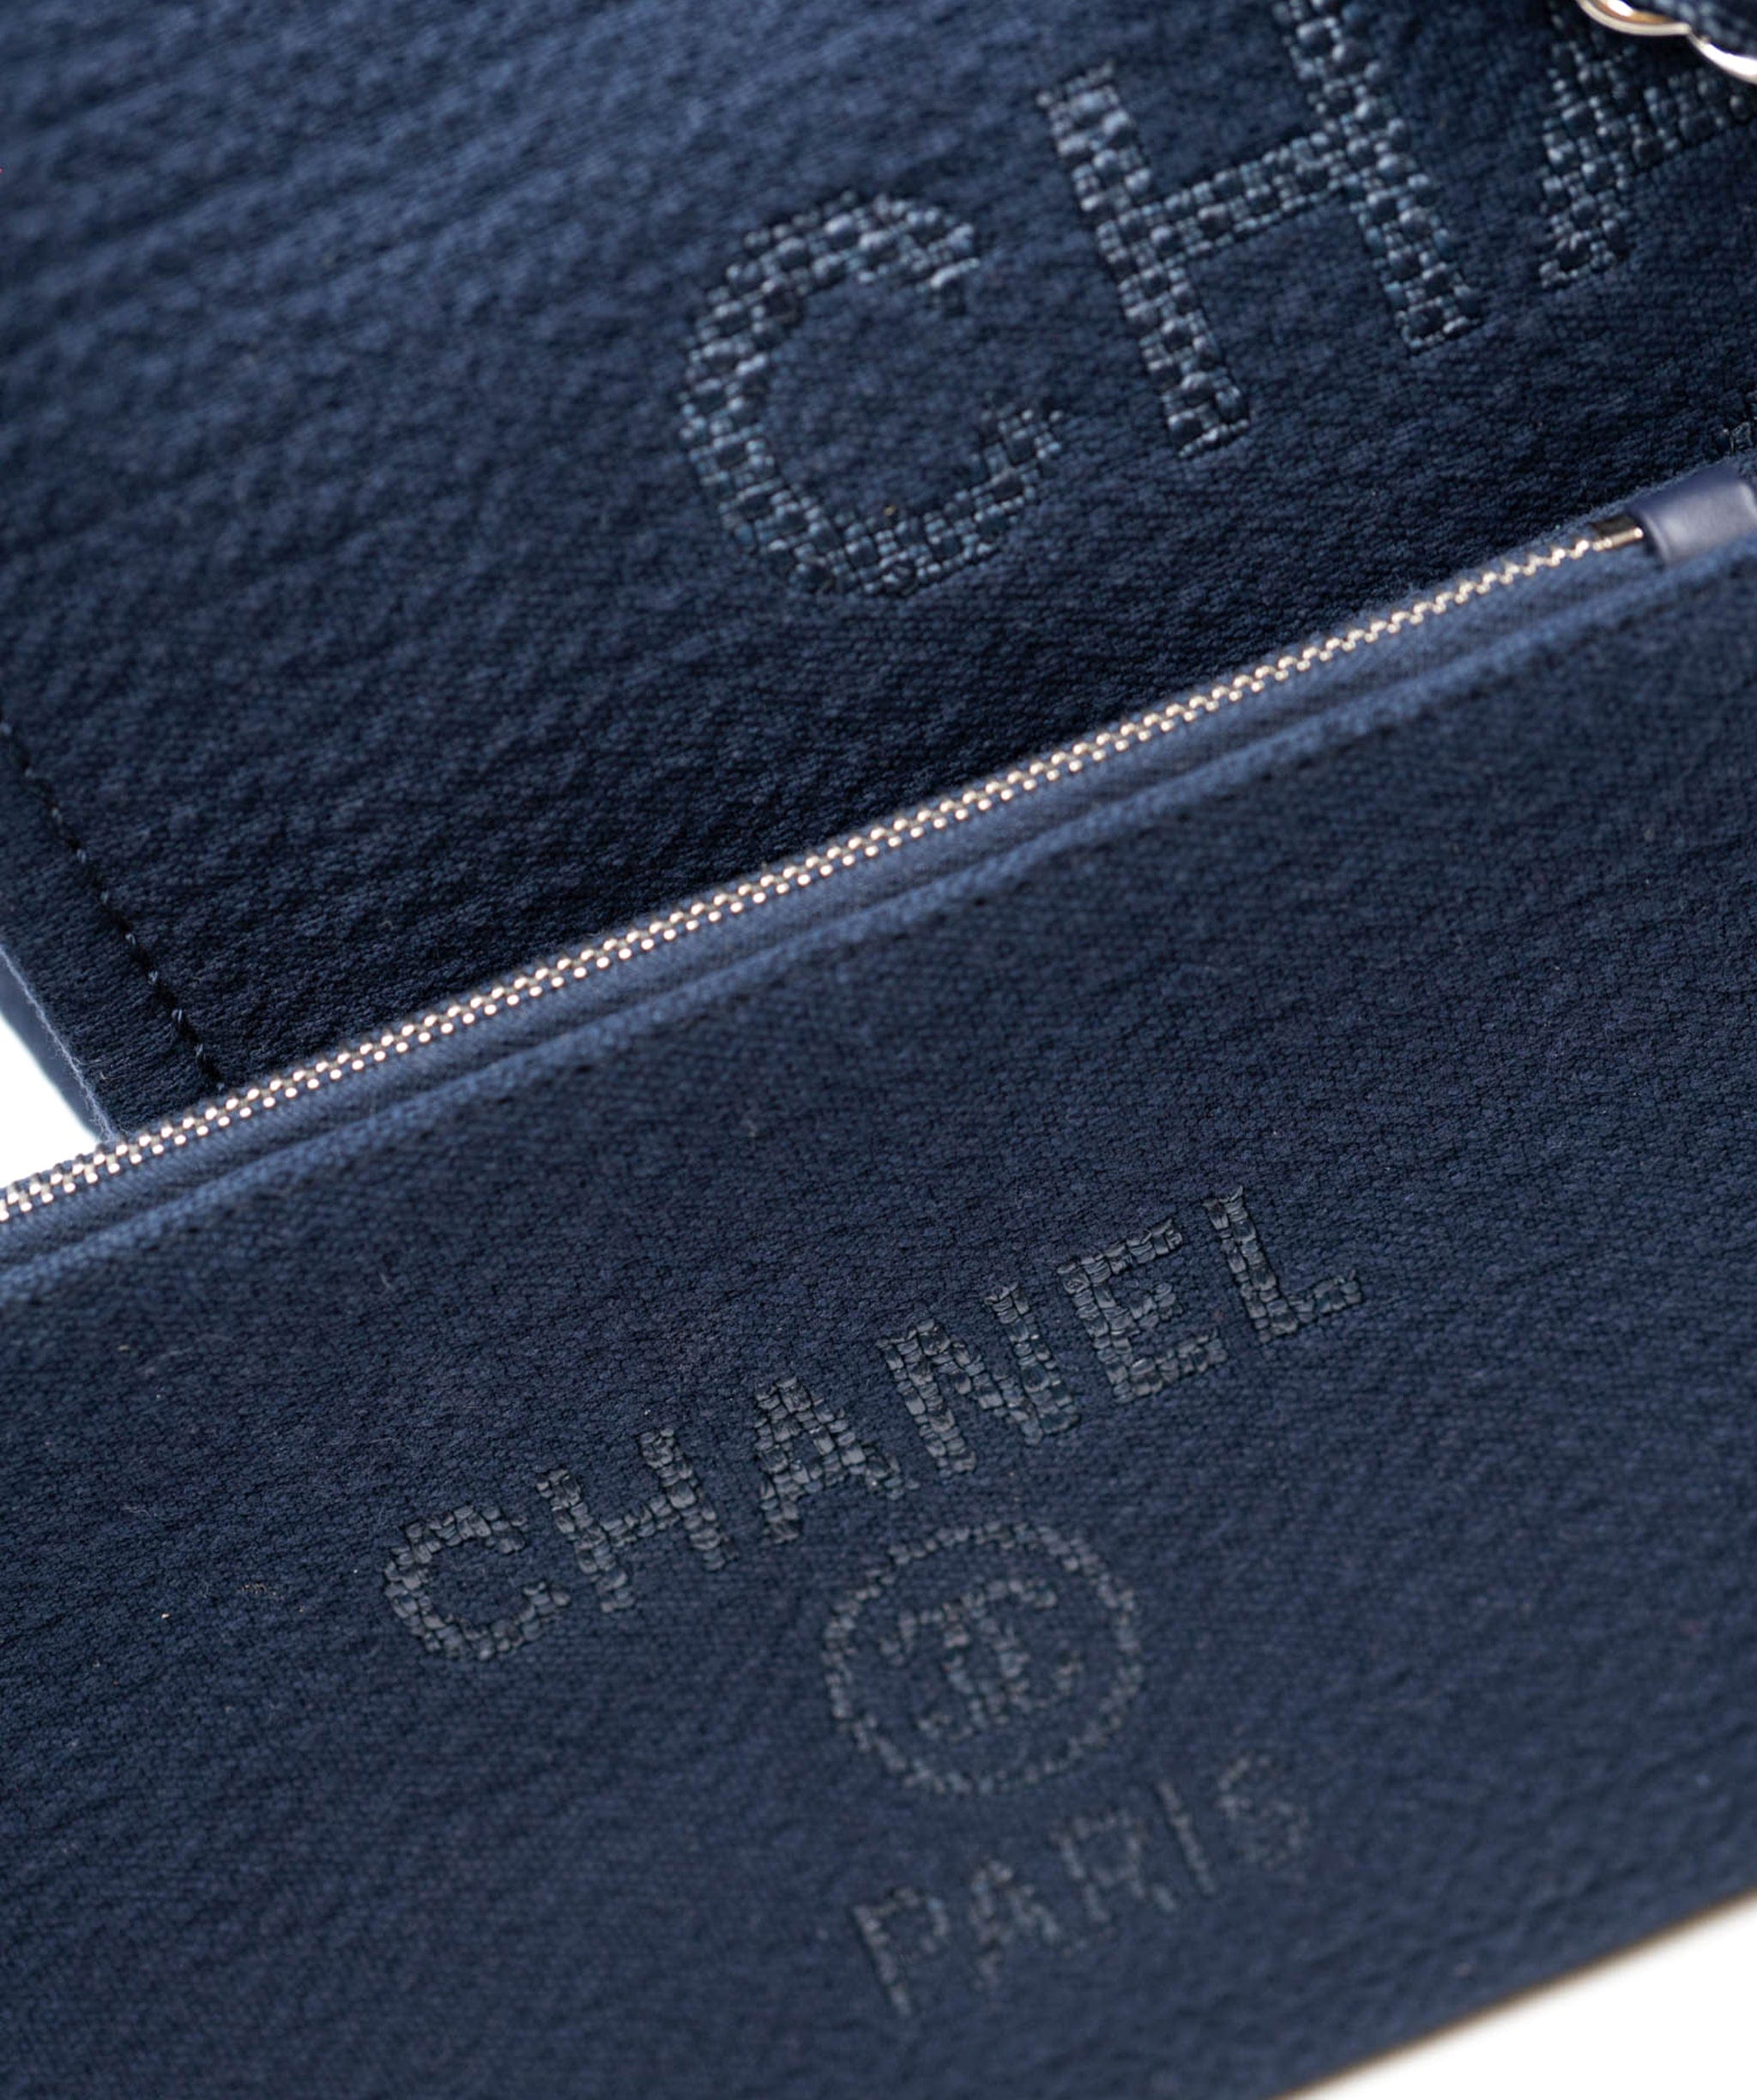 Chanel Chanel deauville bag - AWL3941